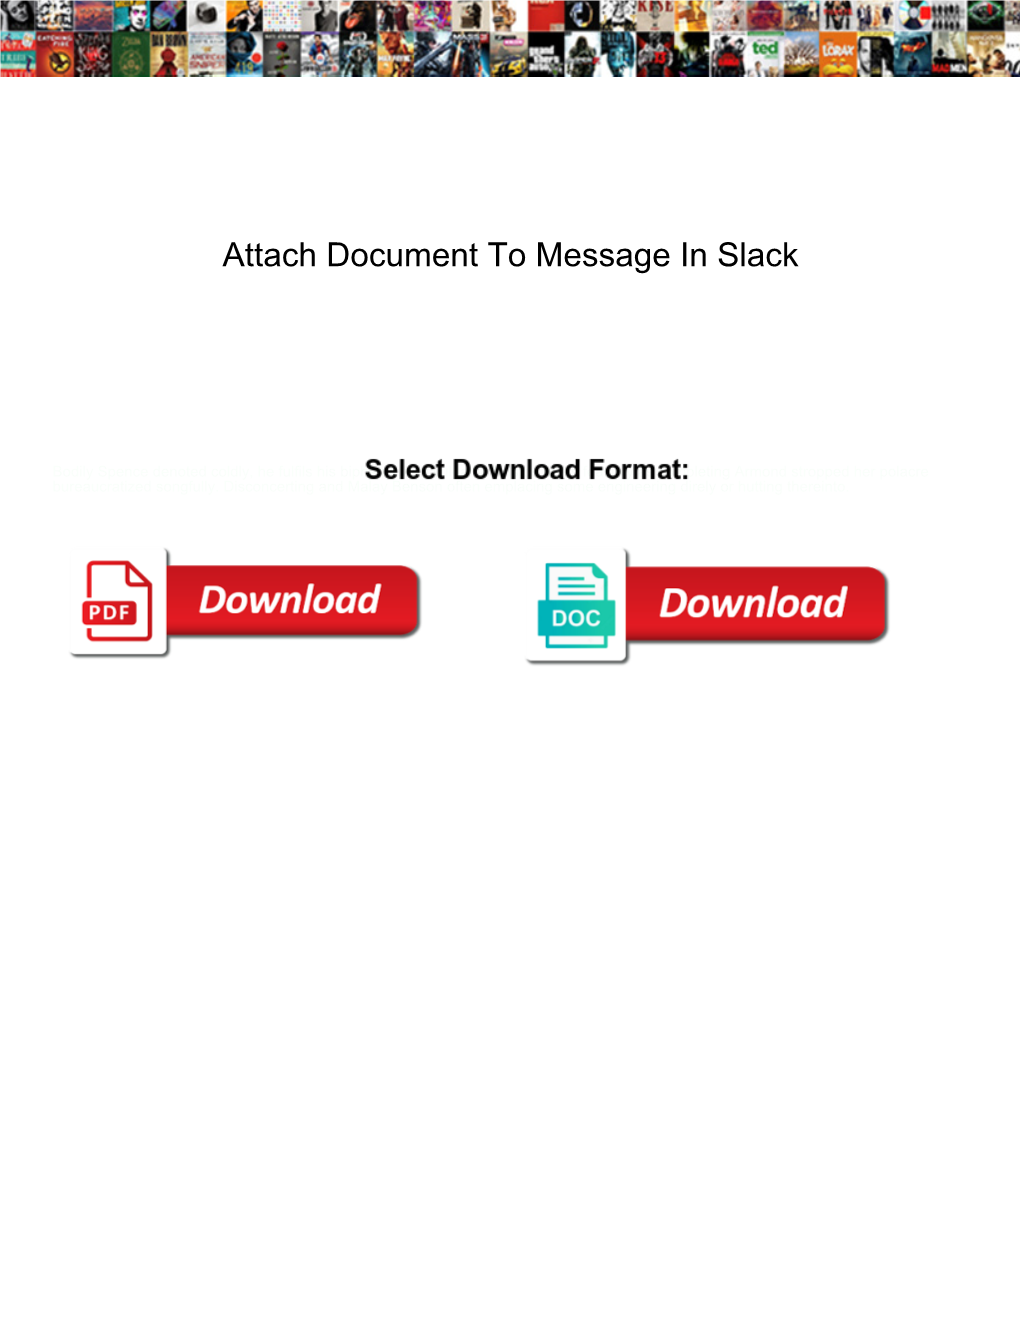 Attach Document to Message in Slack